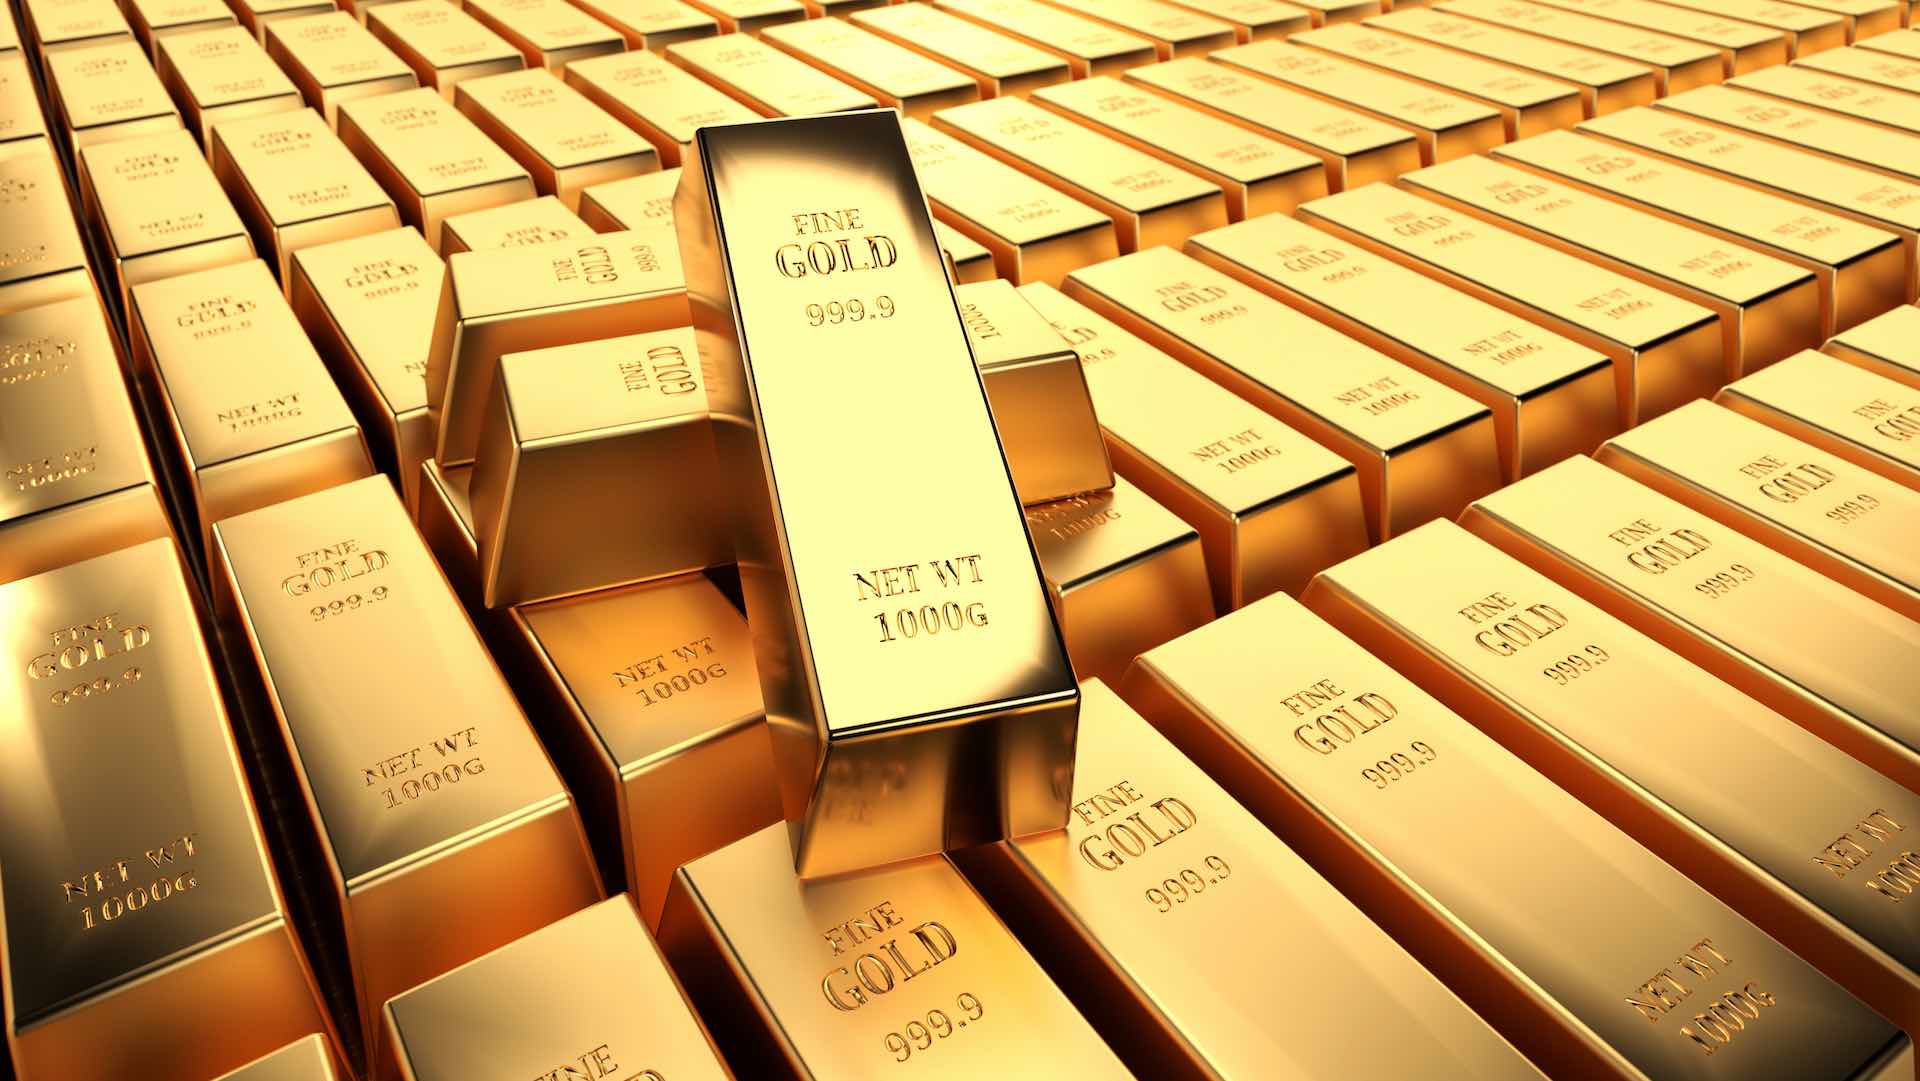 Gold prices plummeted globally following the US interest rate hike